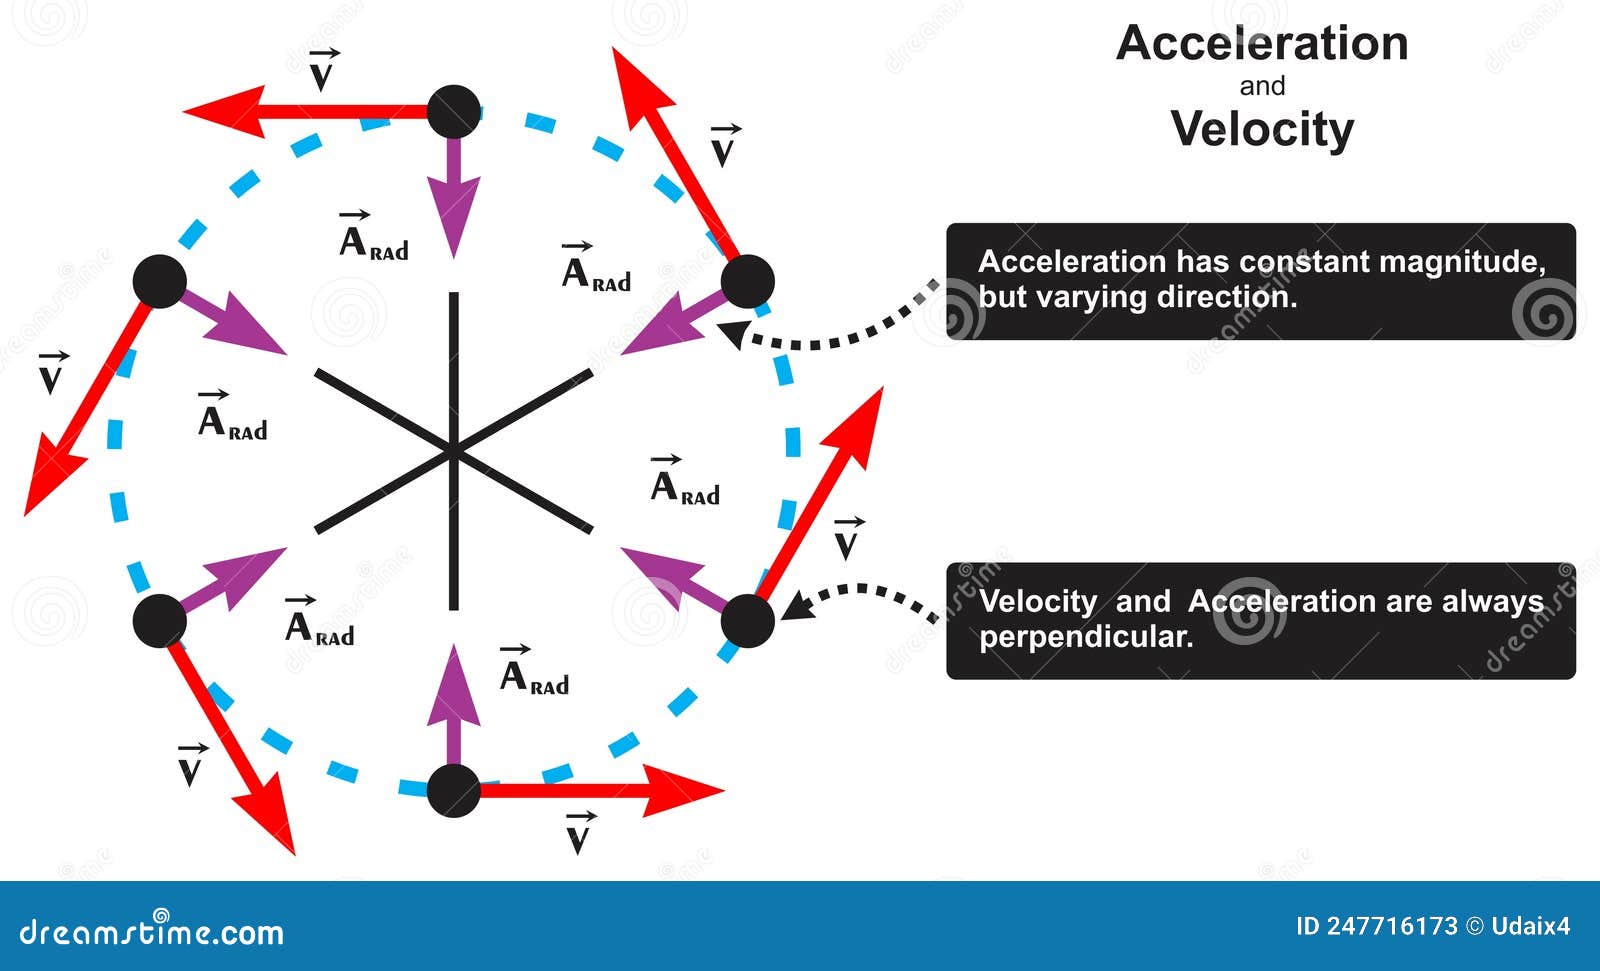 acceleration and velocity infographic diagram